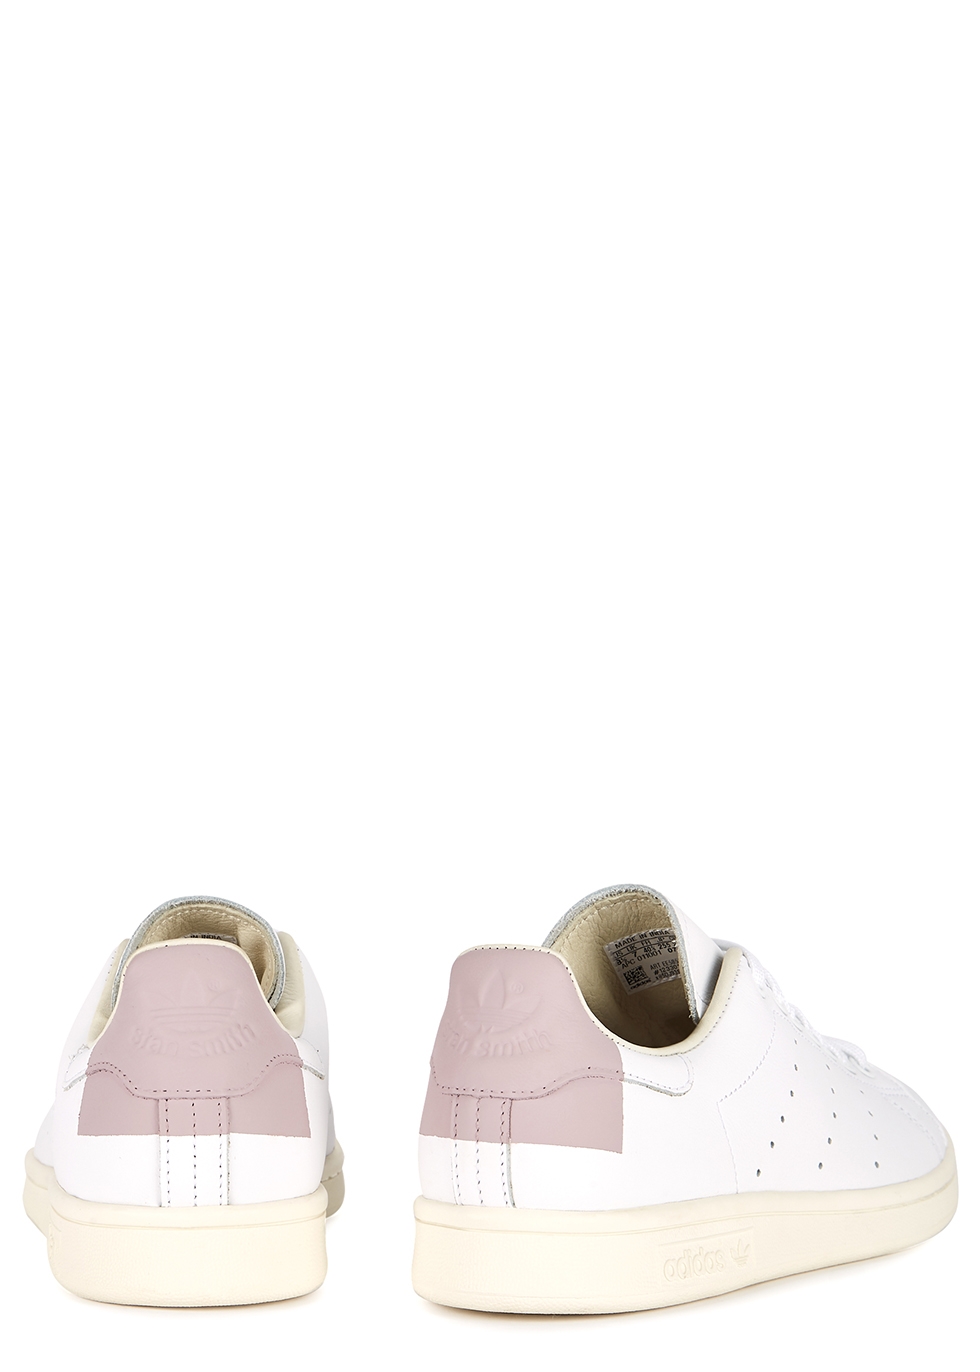 pink leather sneakers